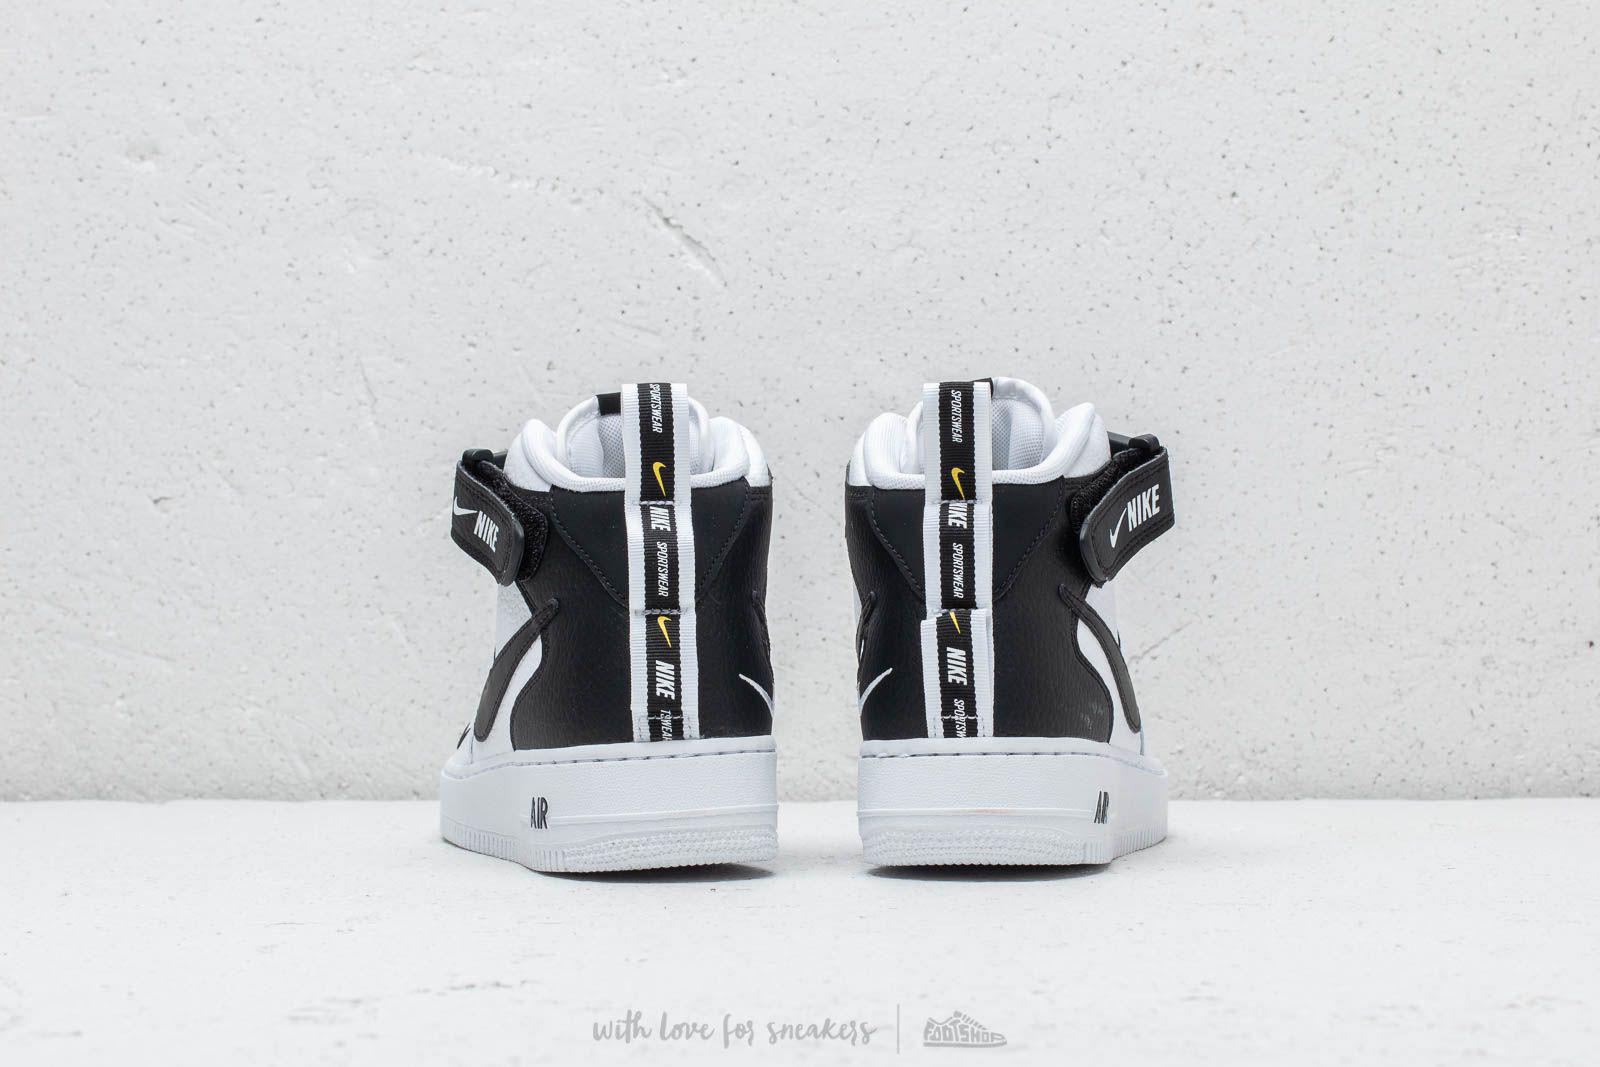 Nike Men's Air Force 1 Mid '07 LV8 Shoes in Black